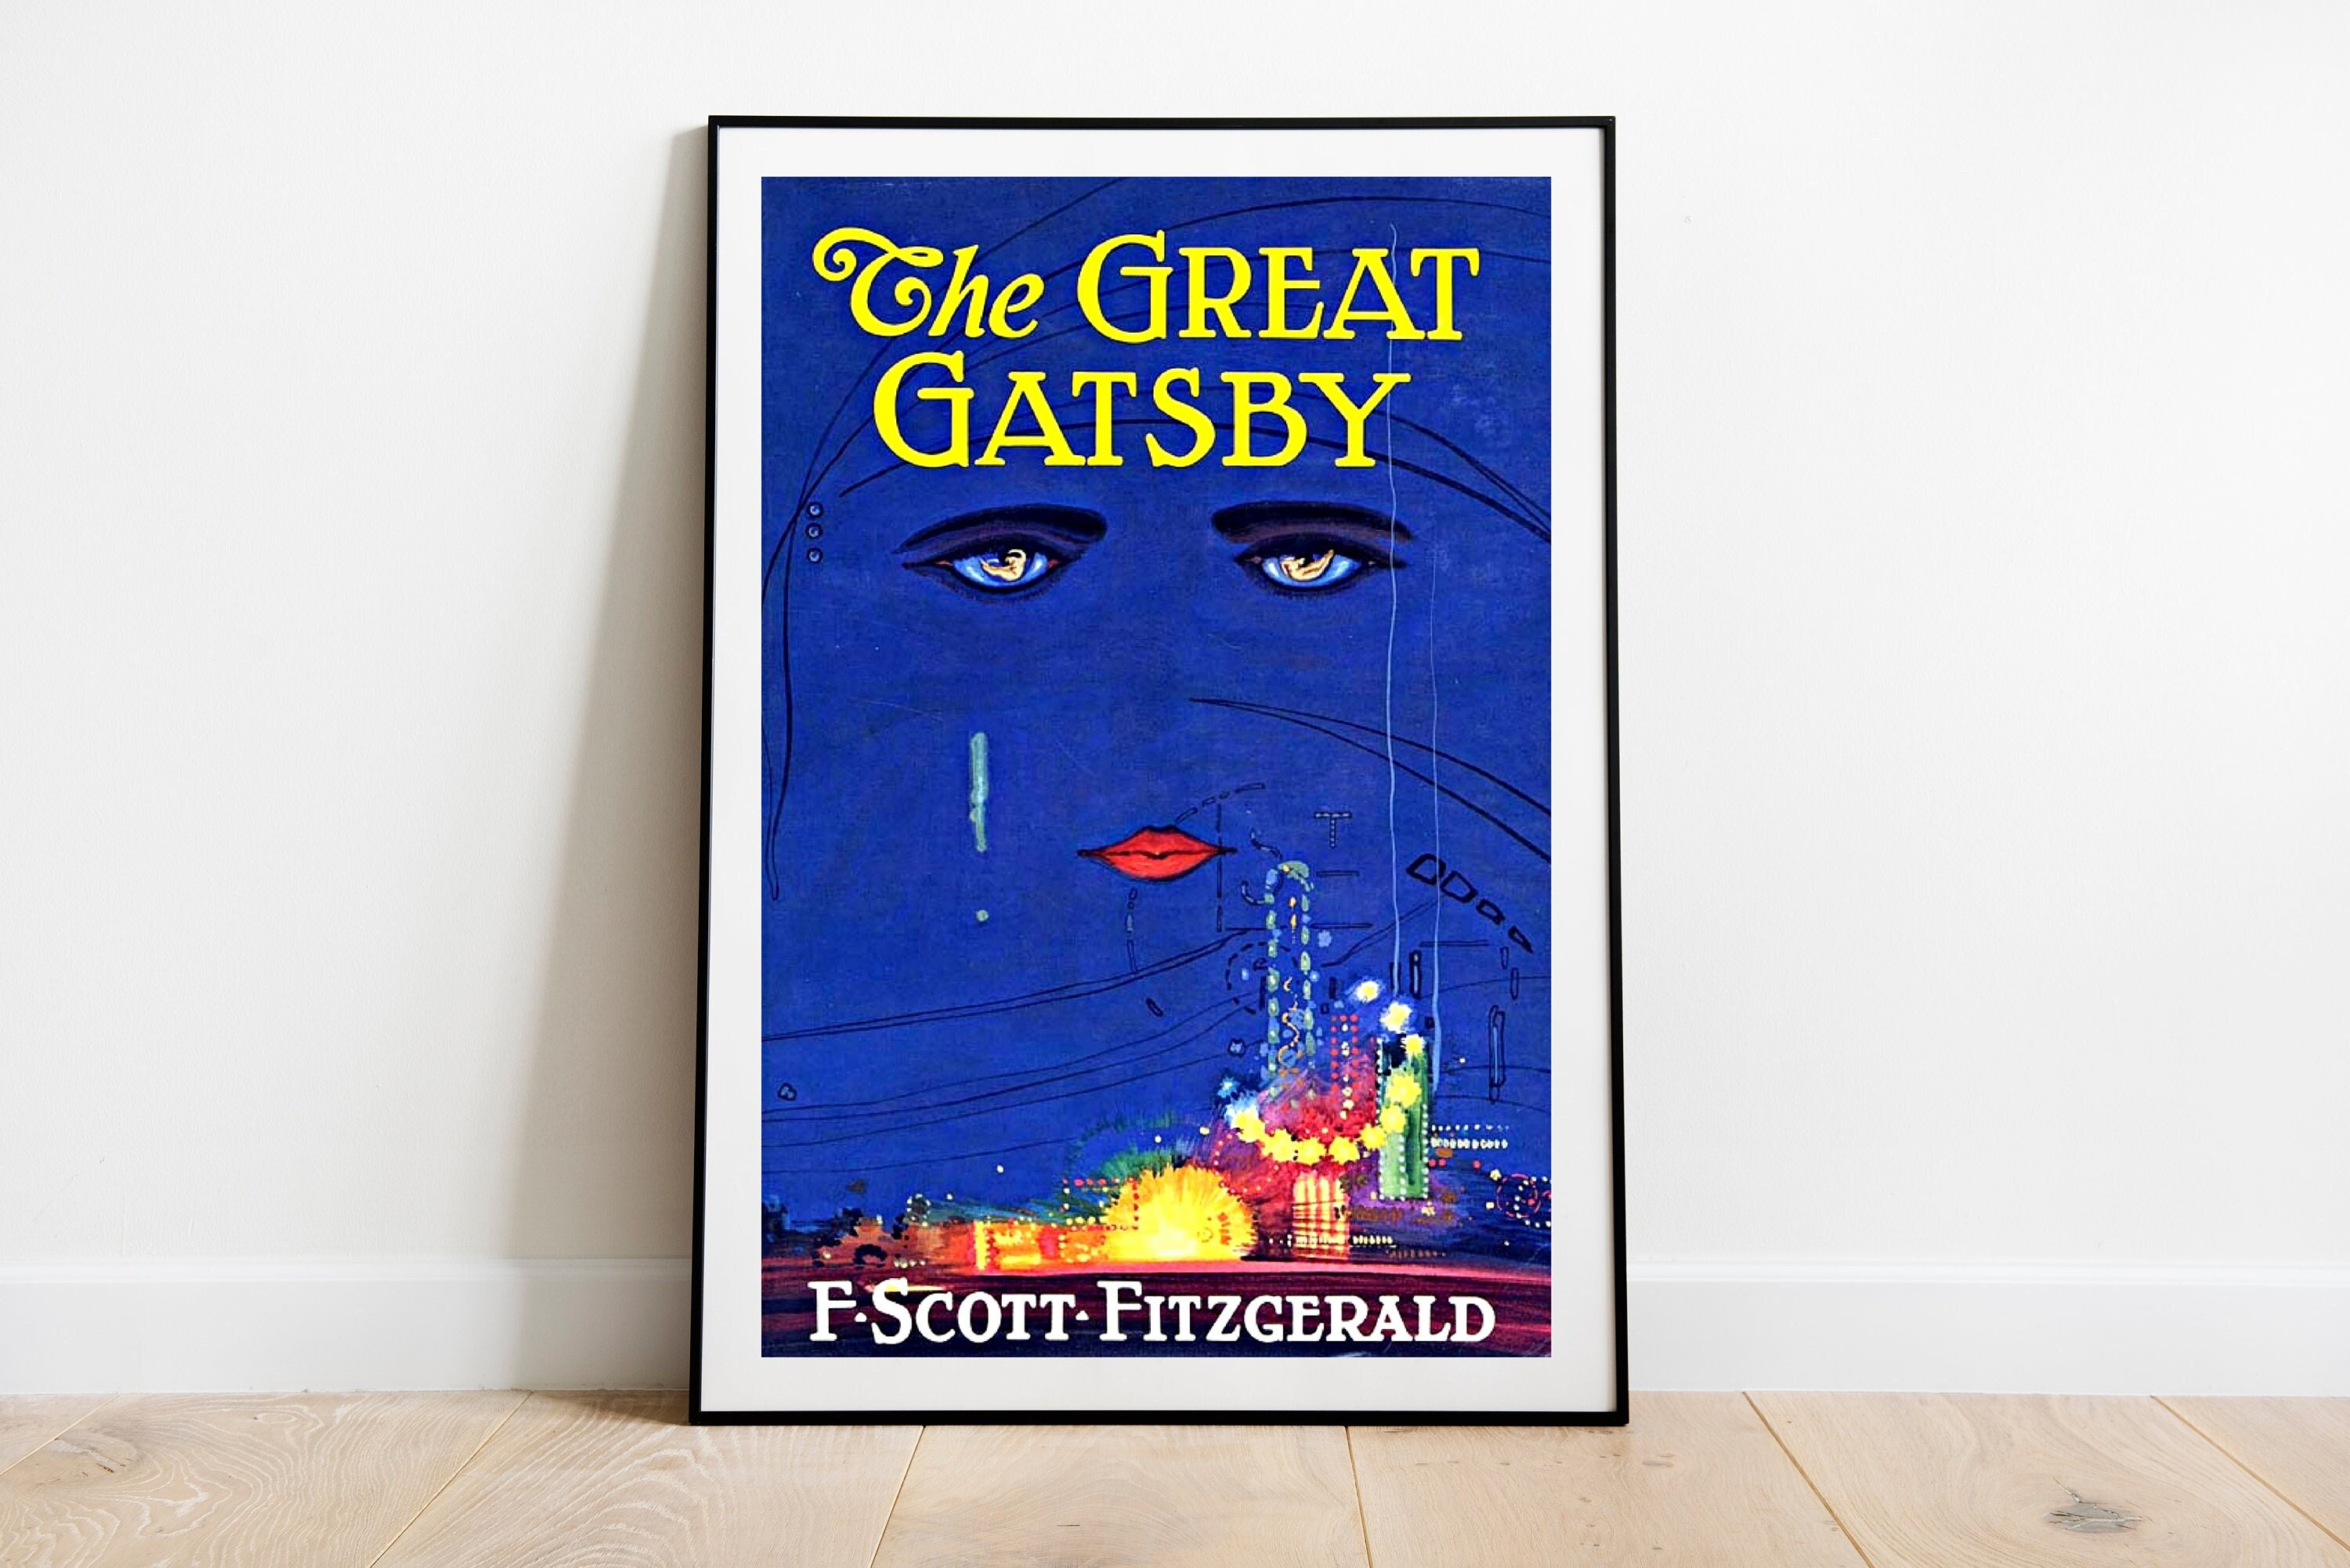  Great Gatsby Quote Wall Art, F. Scott Fitgerald, Classroom  Decor, Vintage Book Print, Famous Book Wall Art, Antique Book Page